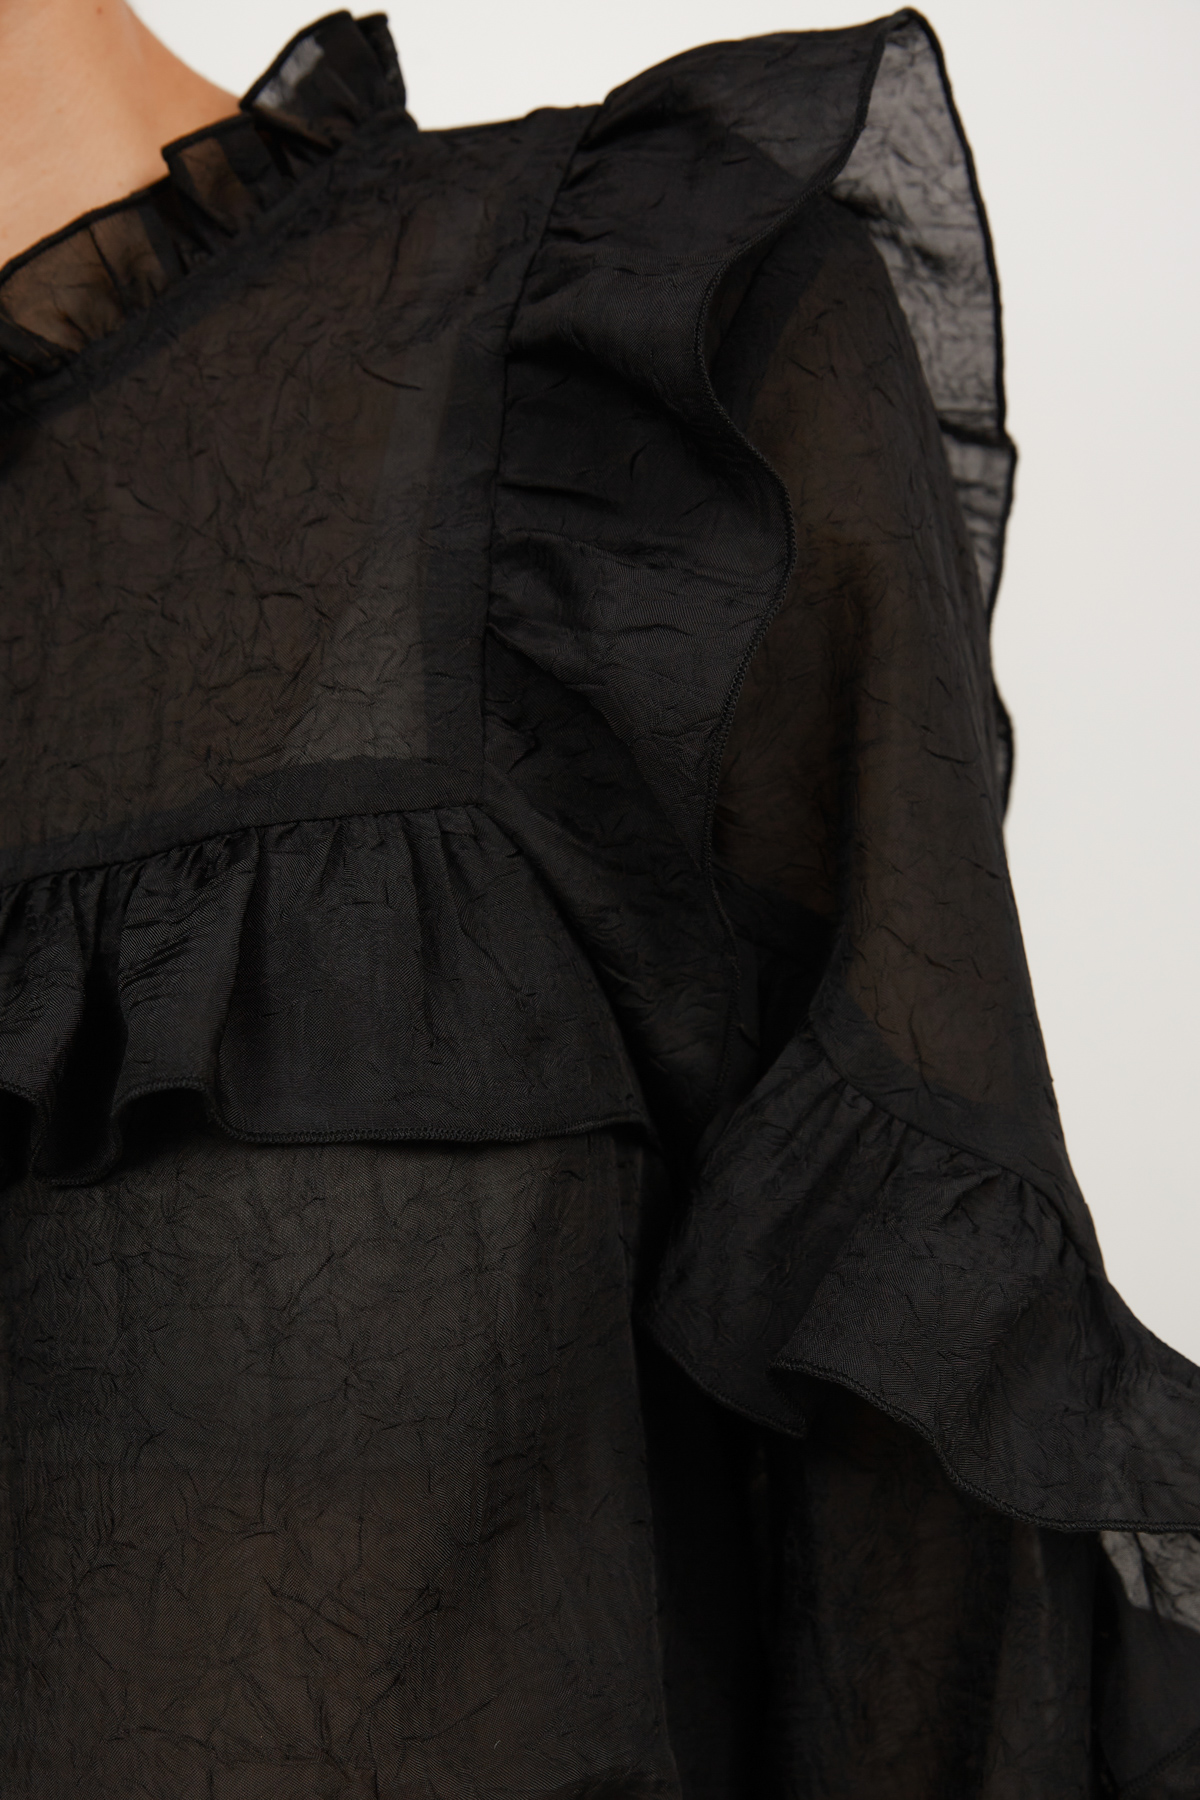 Blouse with ruffles in wrinkled chiffon in black, photo 4